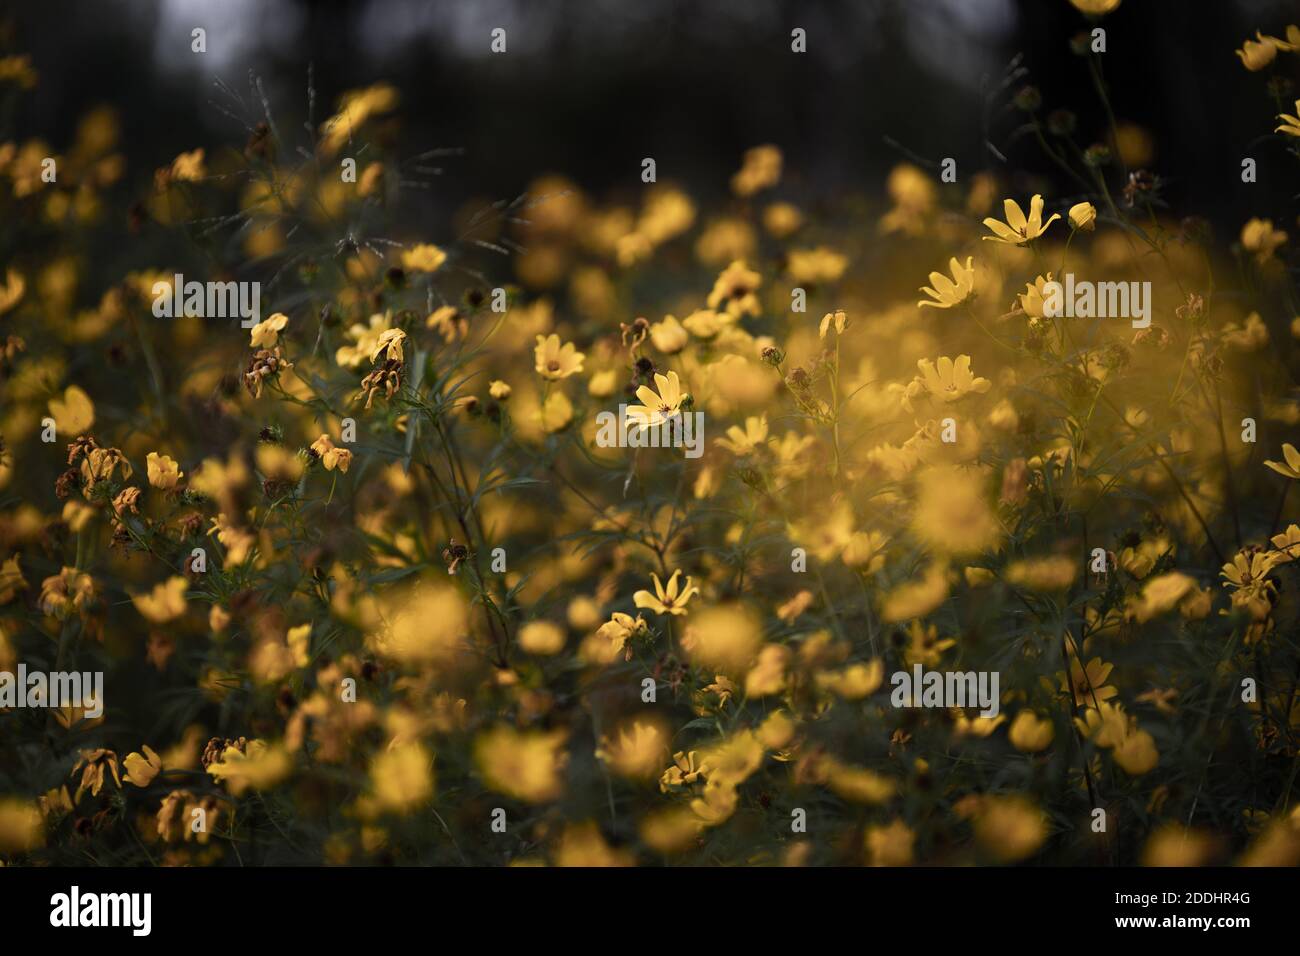 A grouping of golden yellow flowers blooming in October Stock Photo